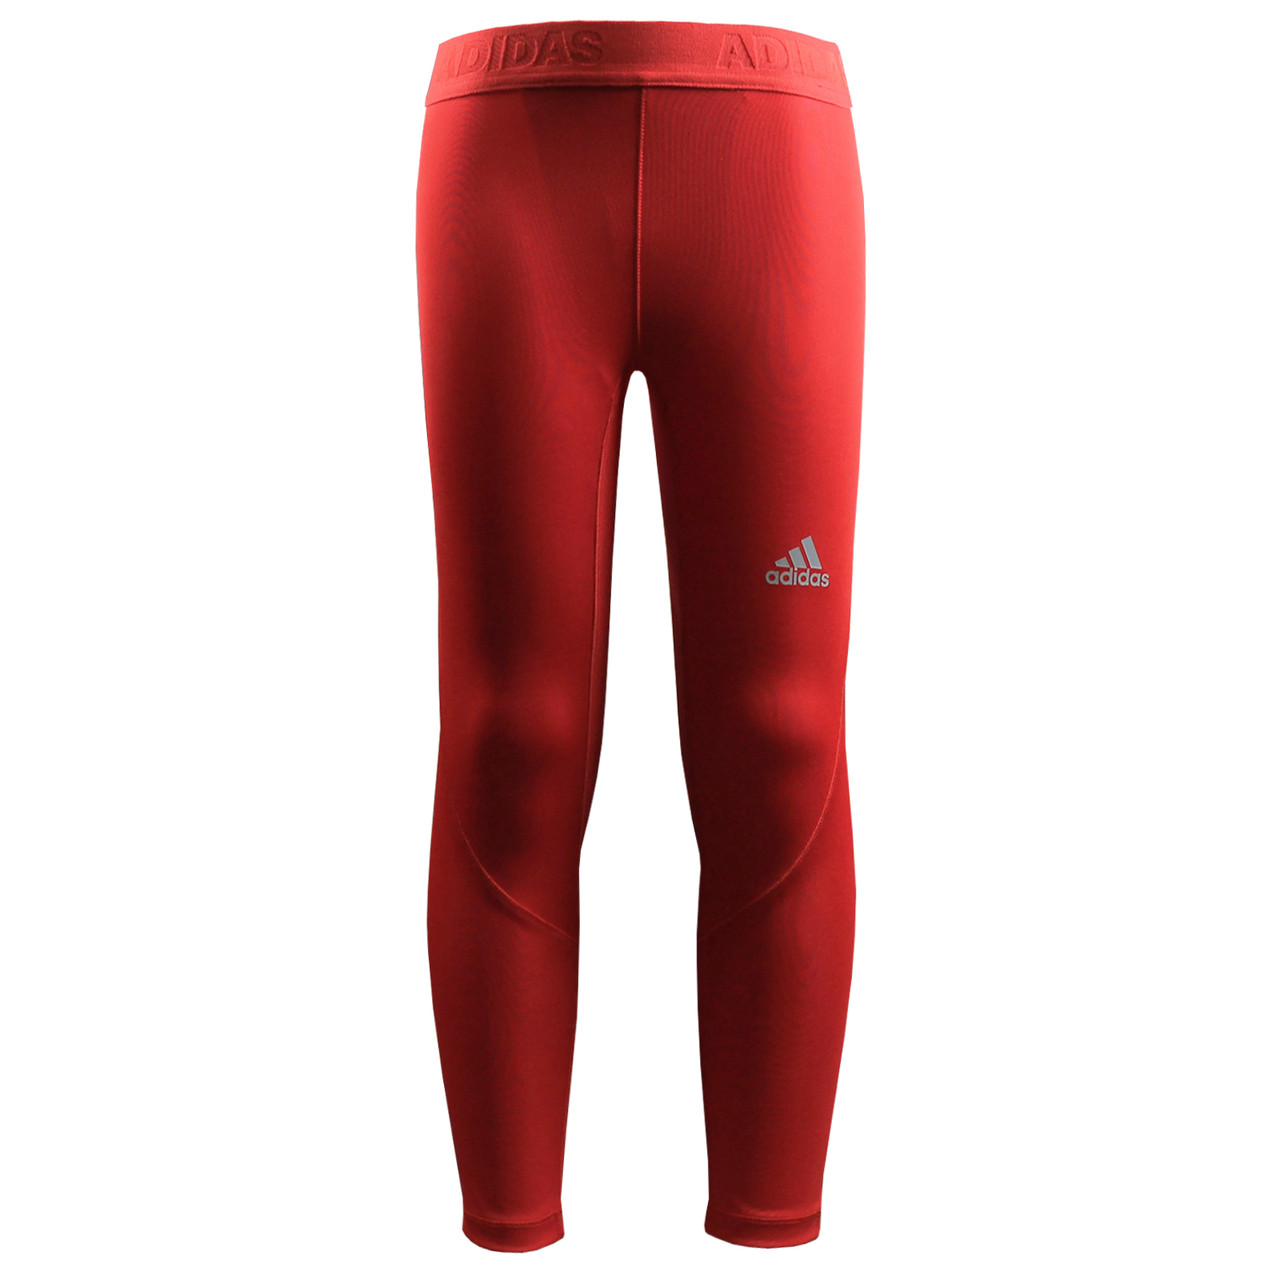 adidas compression pants youth